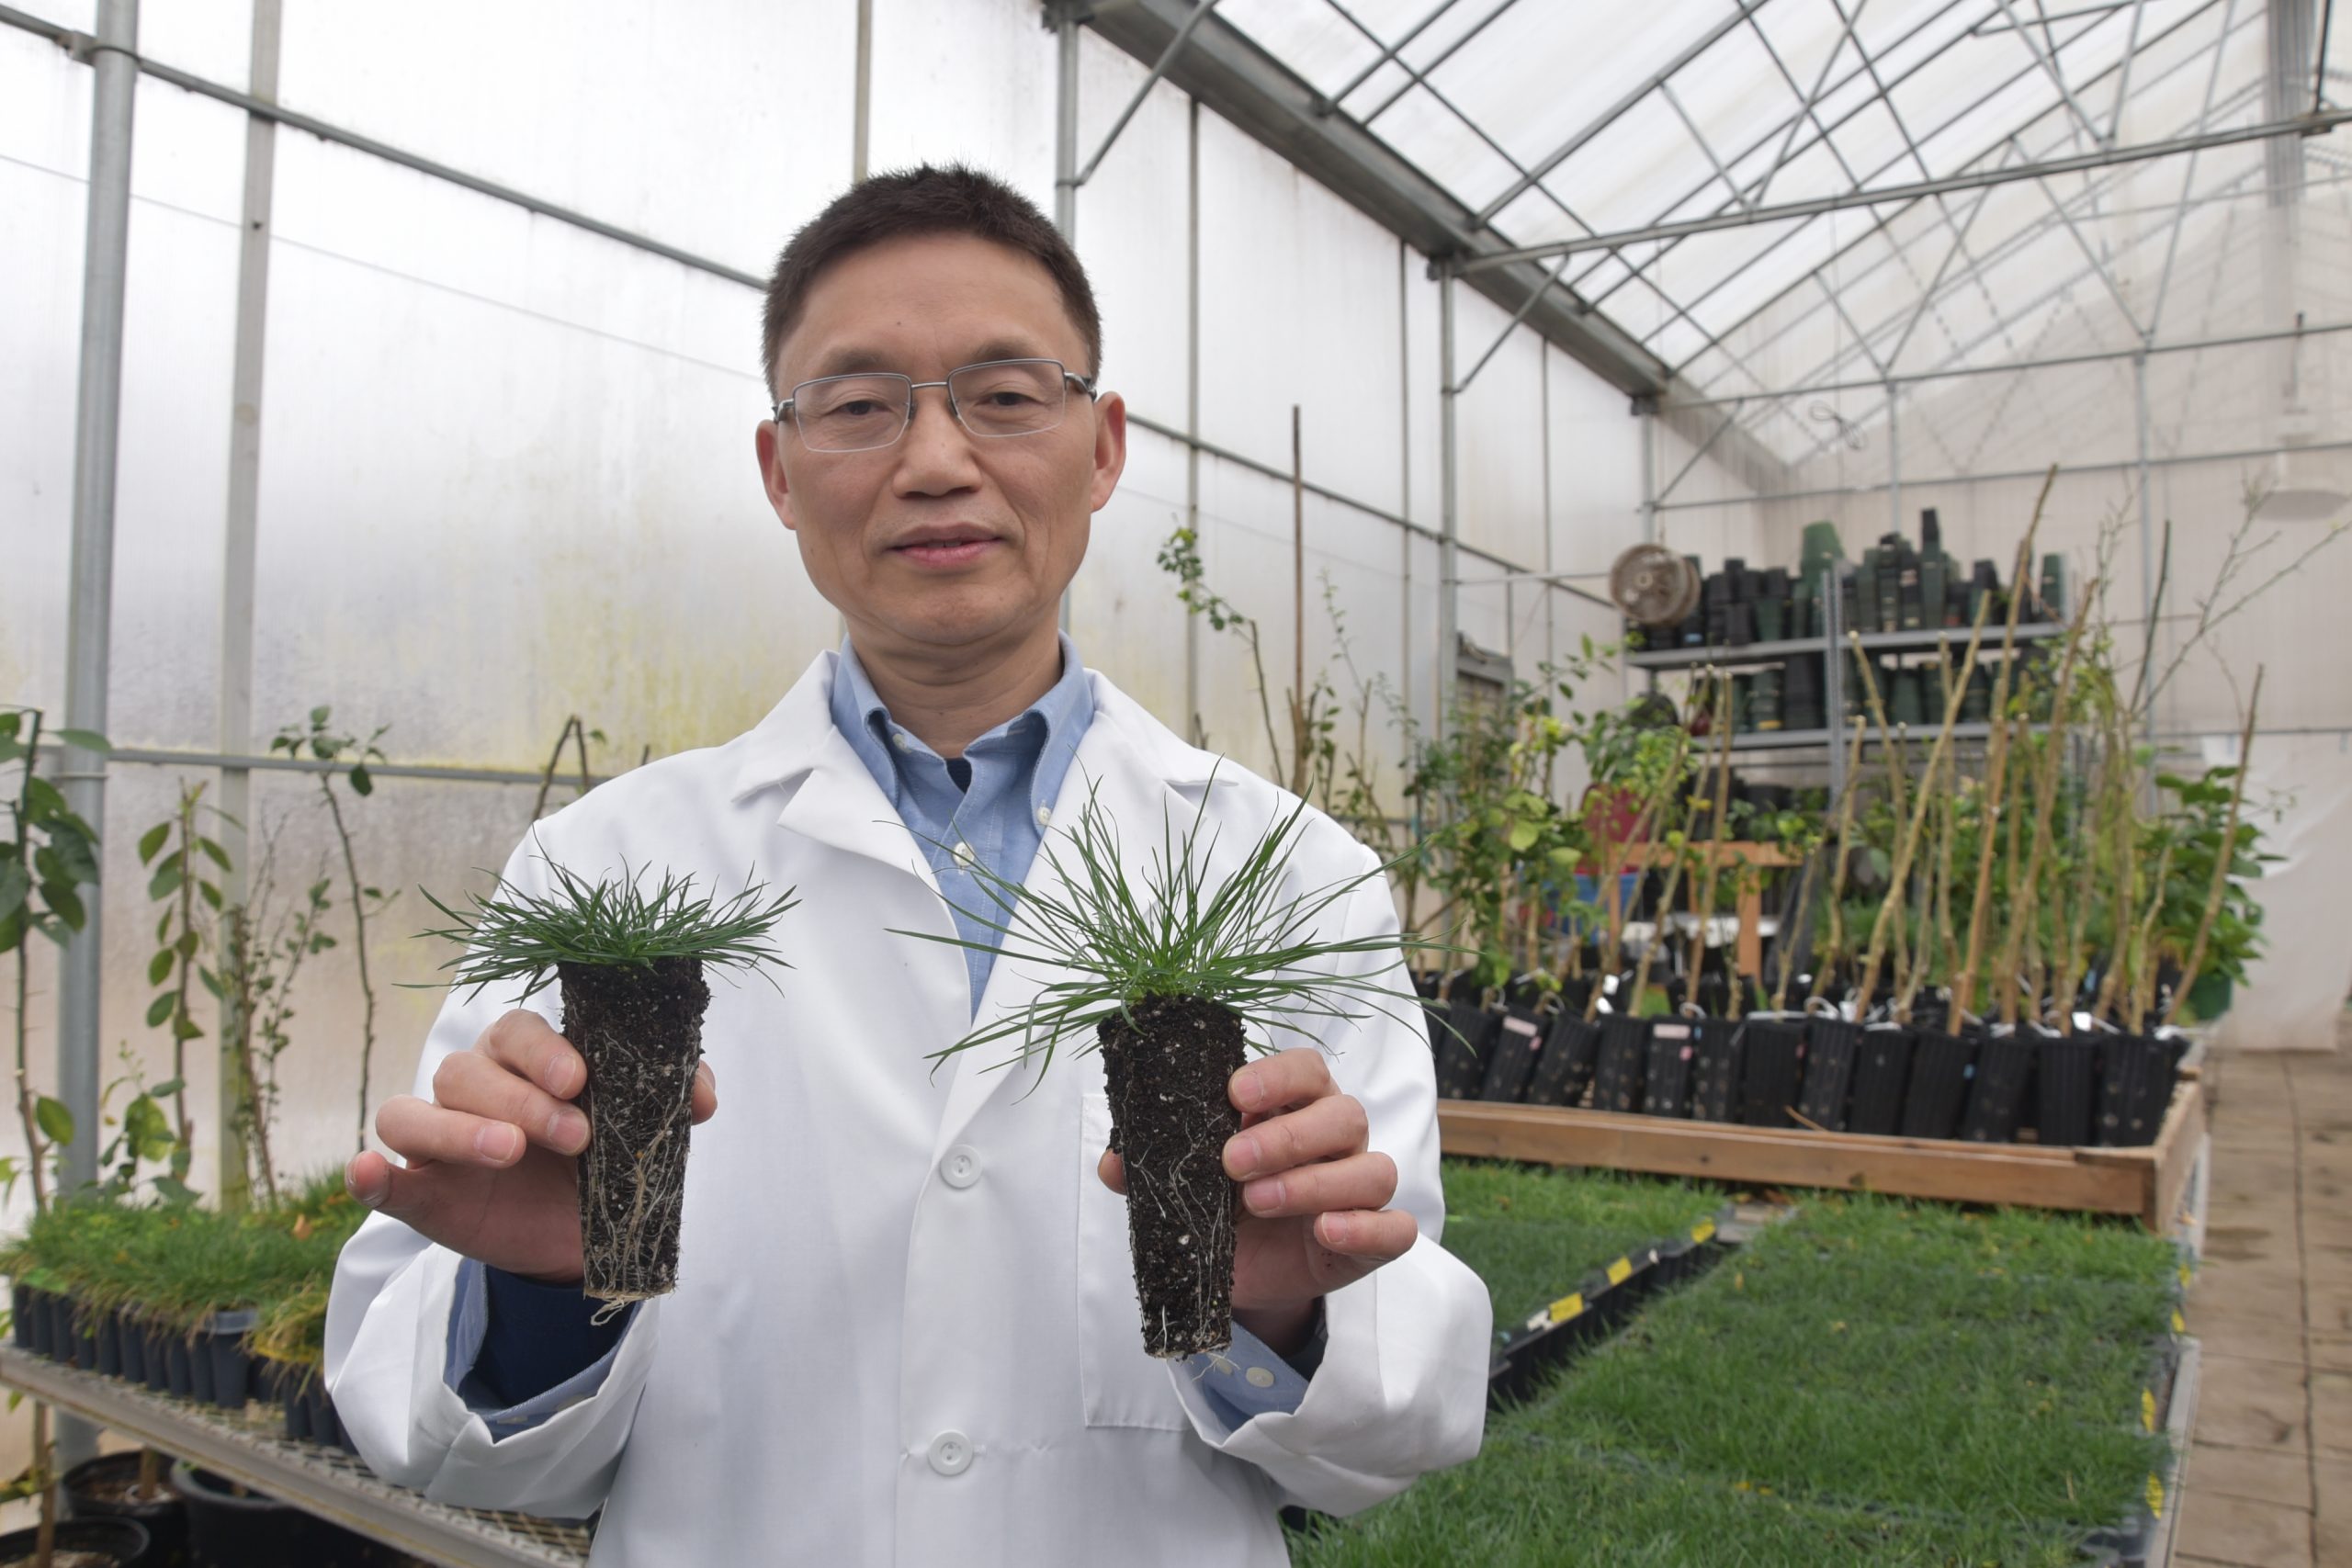 Asian man holding plants standing in a greenhouse